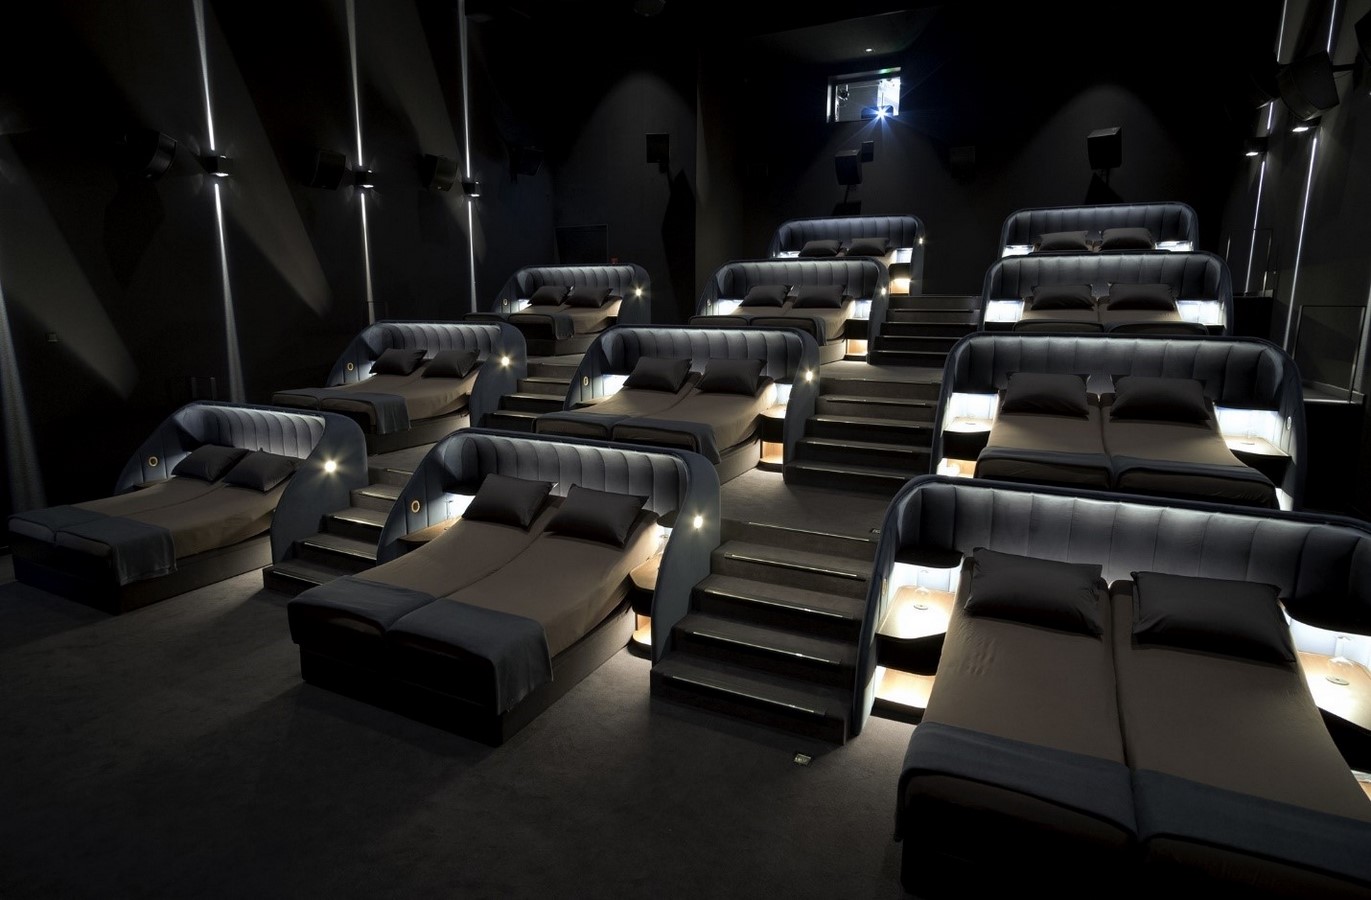 20 Luxurious theater designs for movie nights - Sheet1